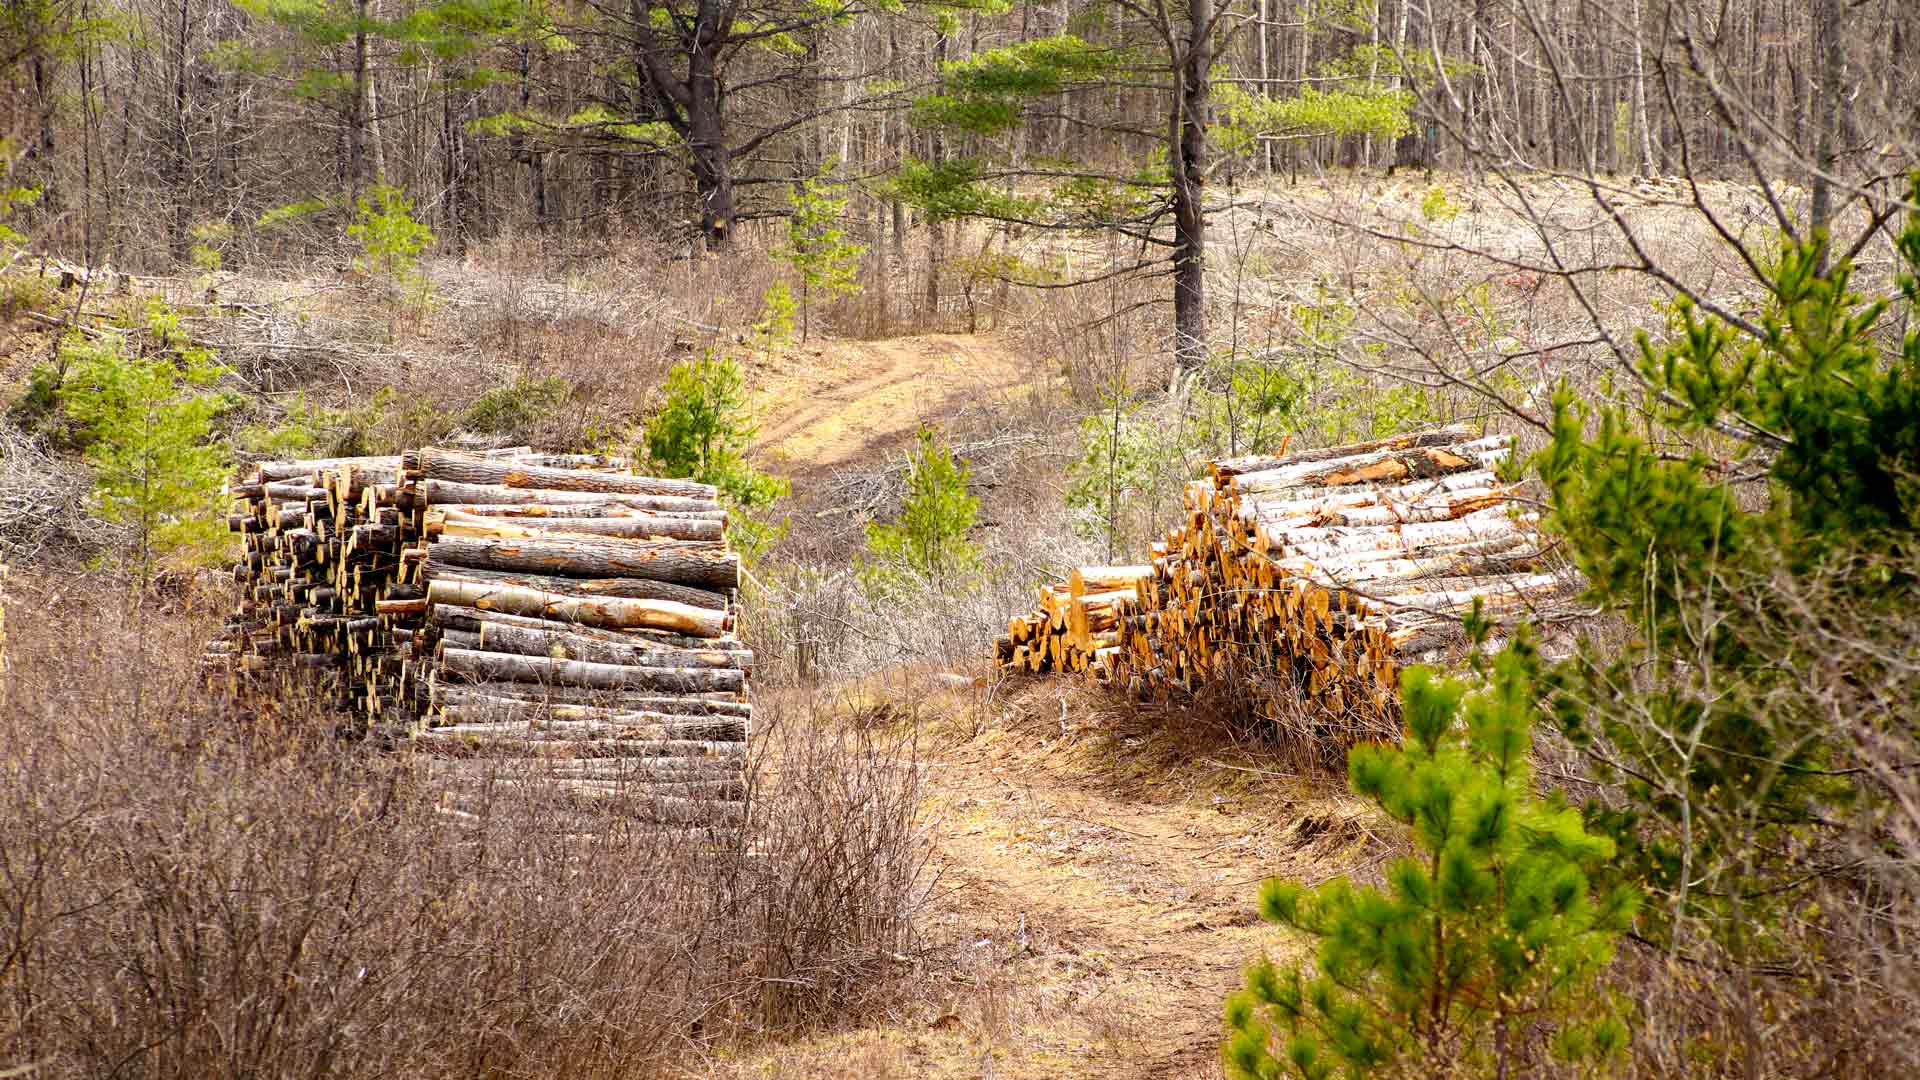 Hilly path with stacked, cut logs on Langley Lake Trails in Vilas County, Wisconsin